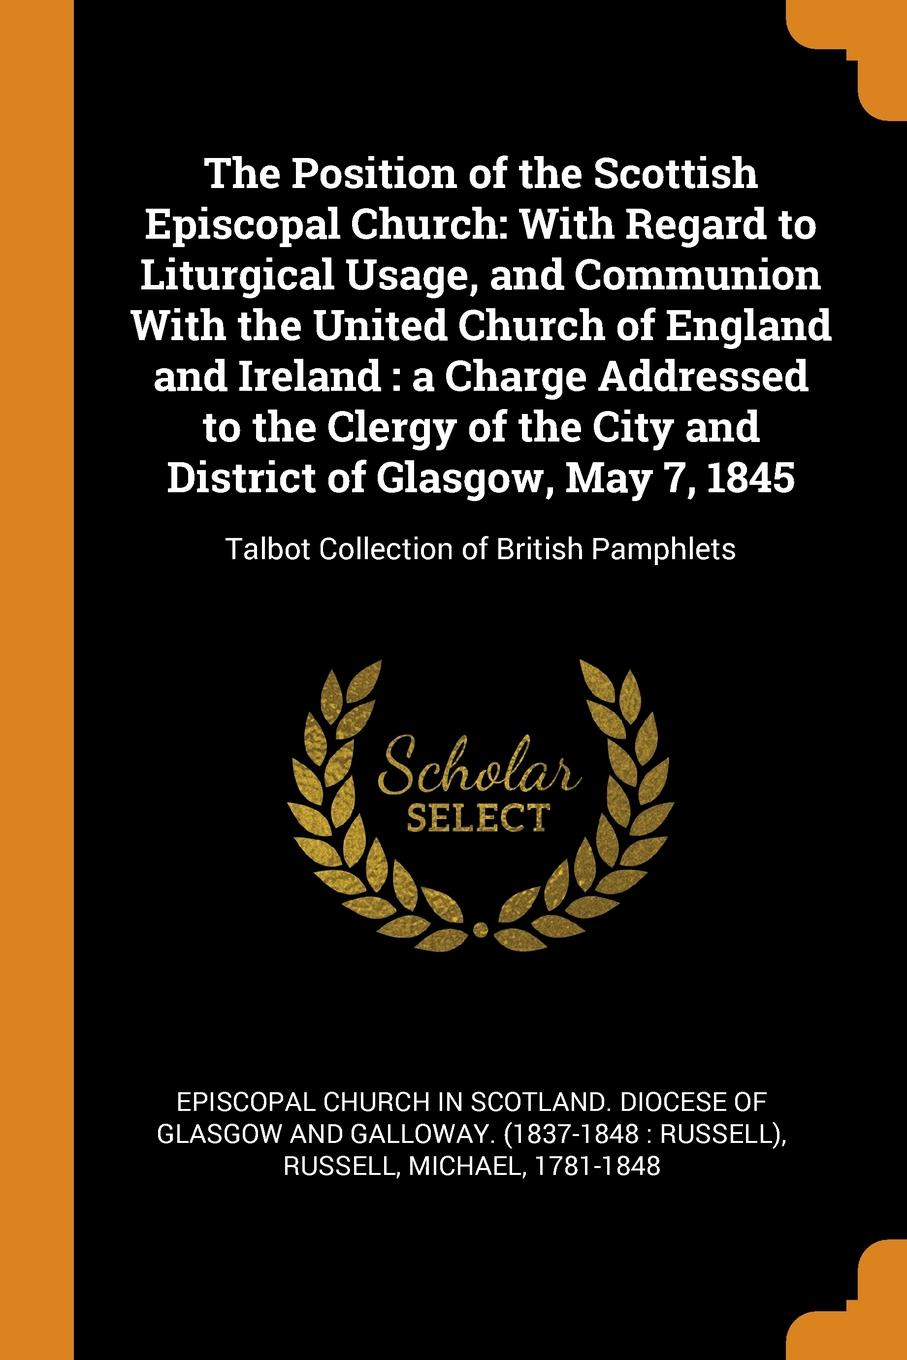 The Position of the Scottish Episcopal Church. With Regard to Liturgical Usage, and Communion With the United Church of England and Ireland : a Charge Addressed to the Clergy of the City and District of Glasgow, May 7, 1845: Talbot Collection of B...